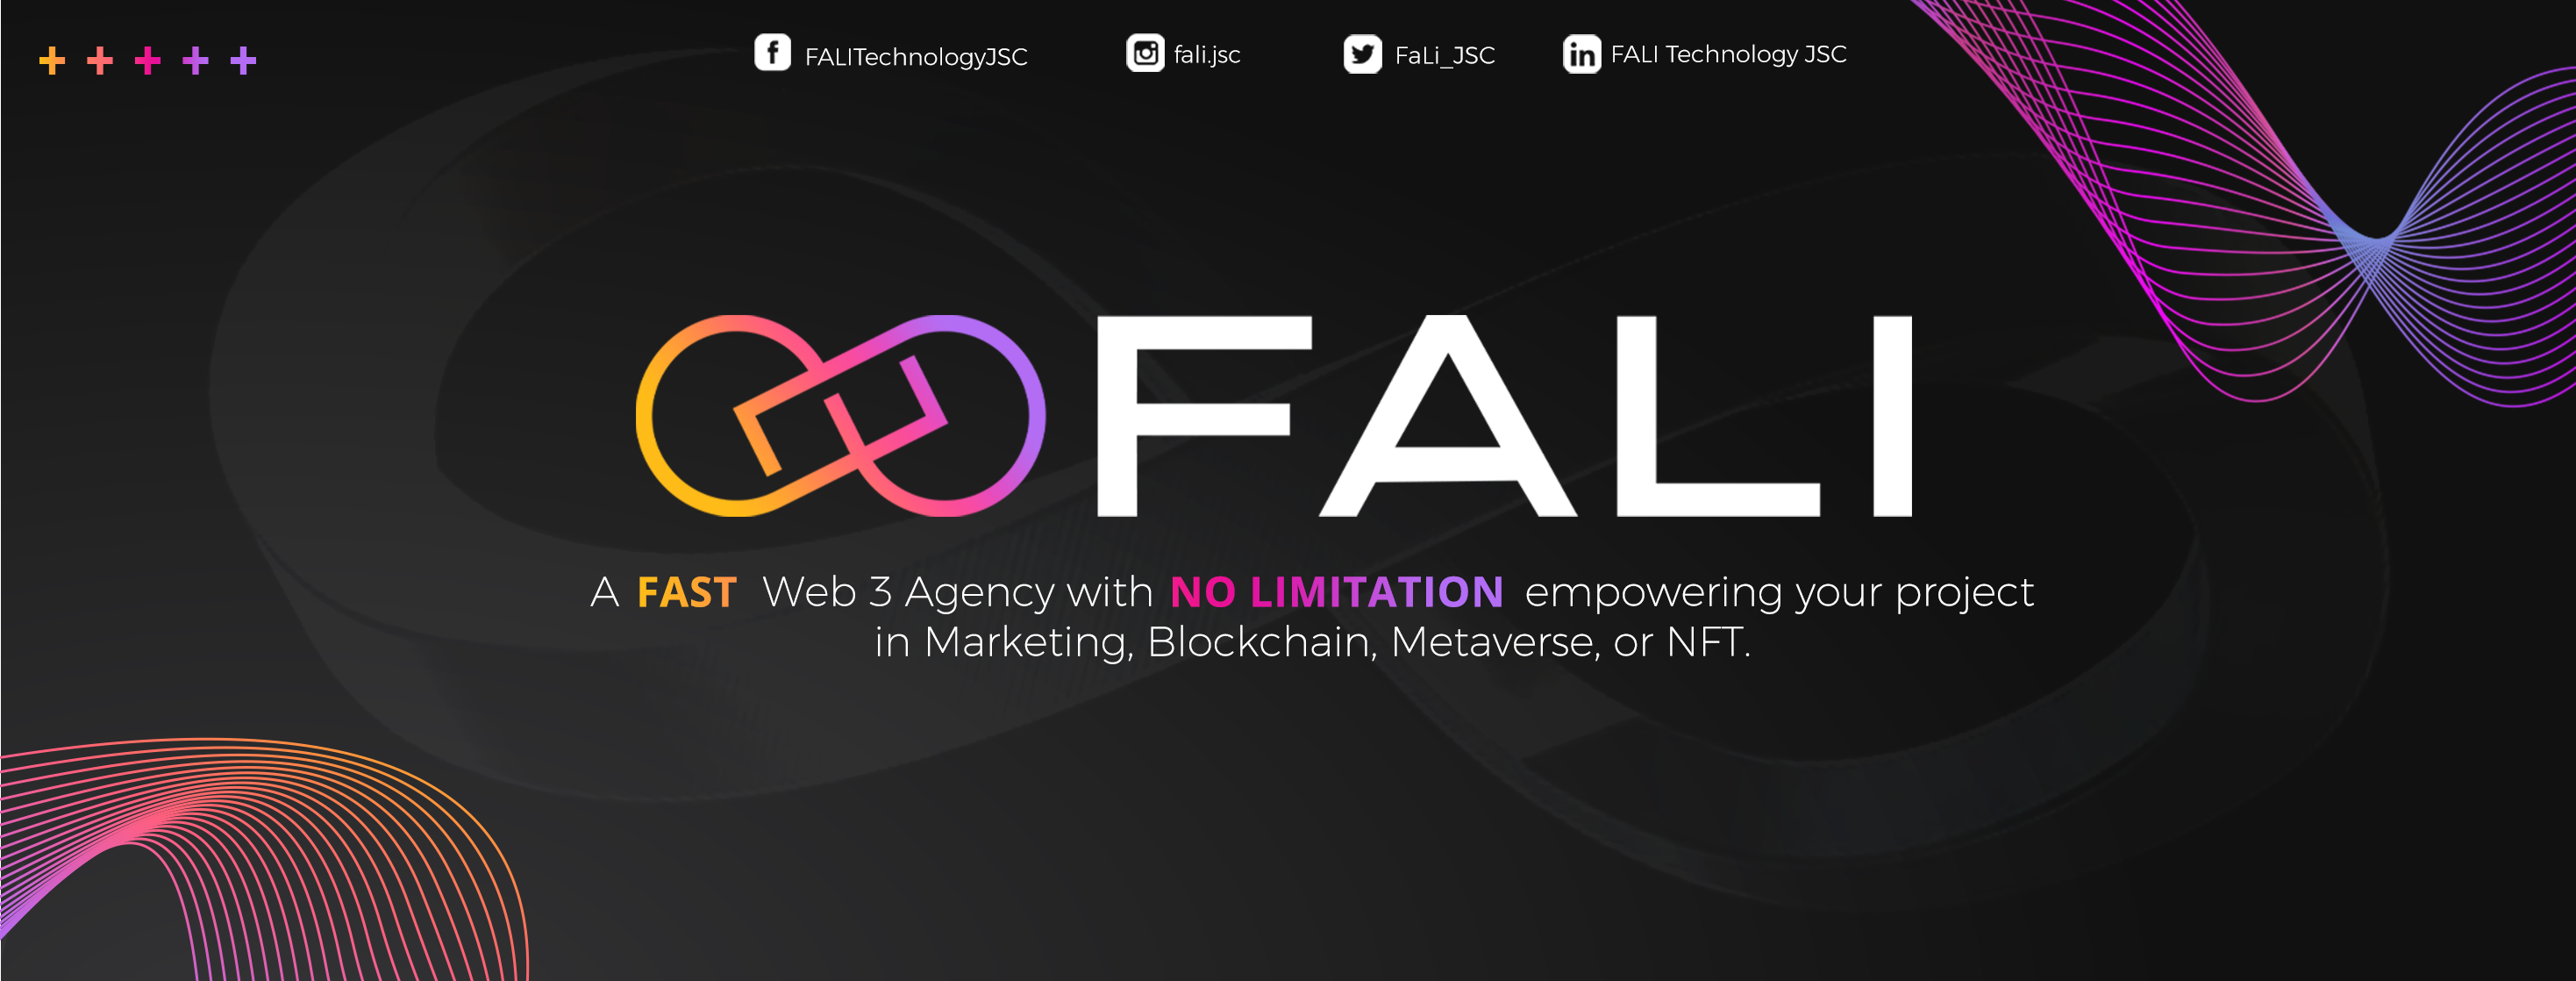 Cover image for FALI Technology Jsc